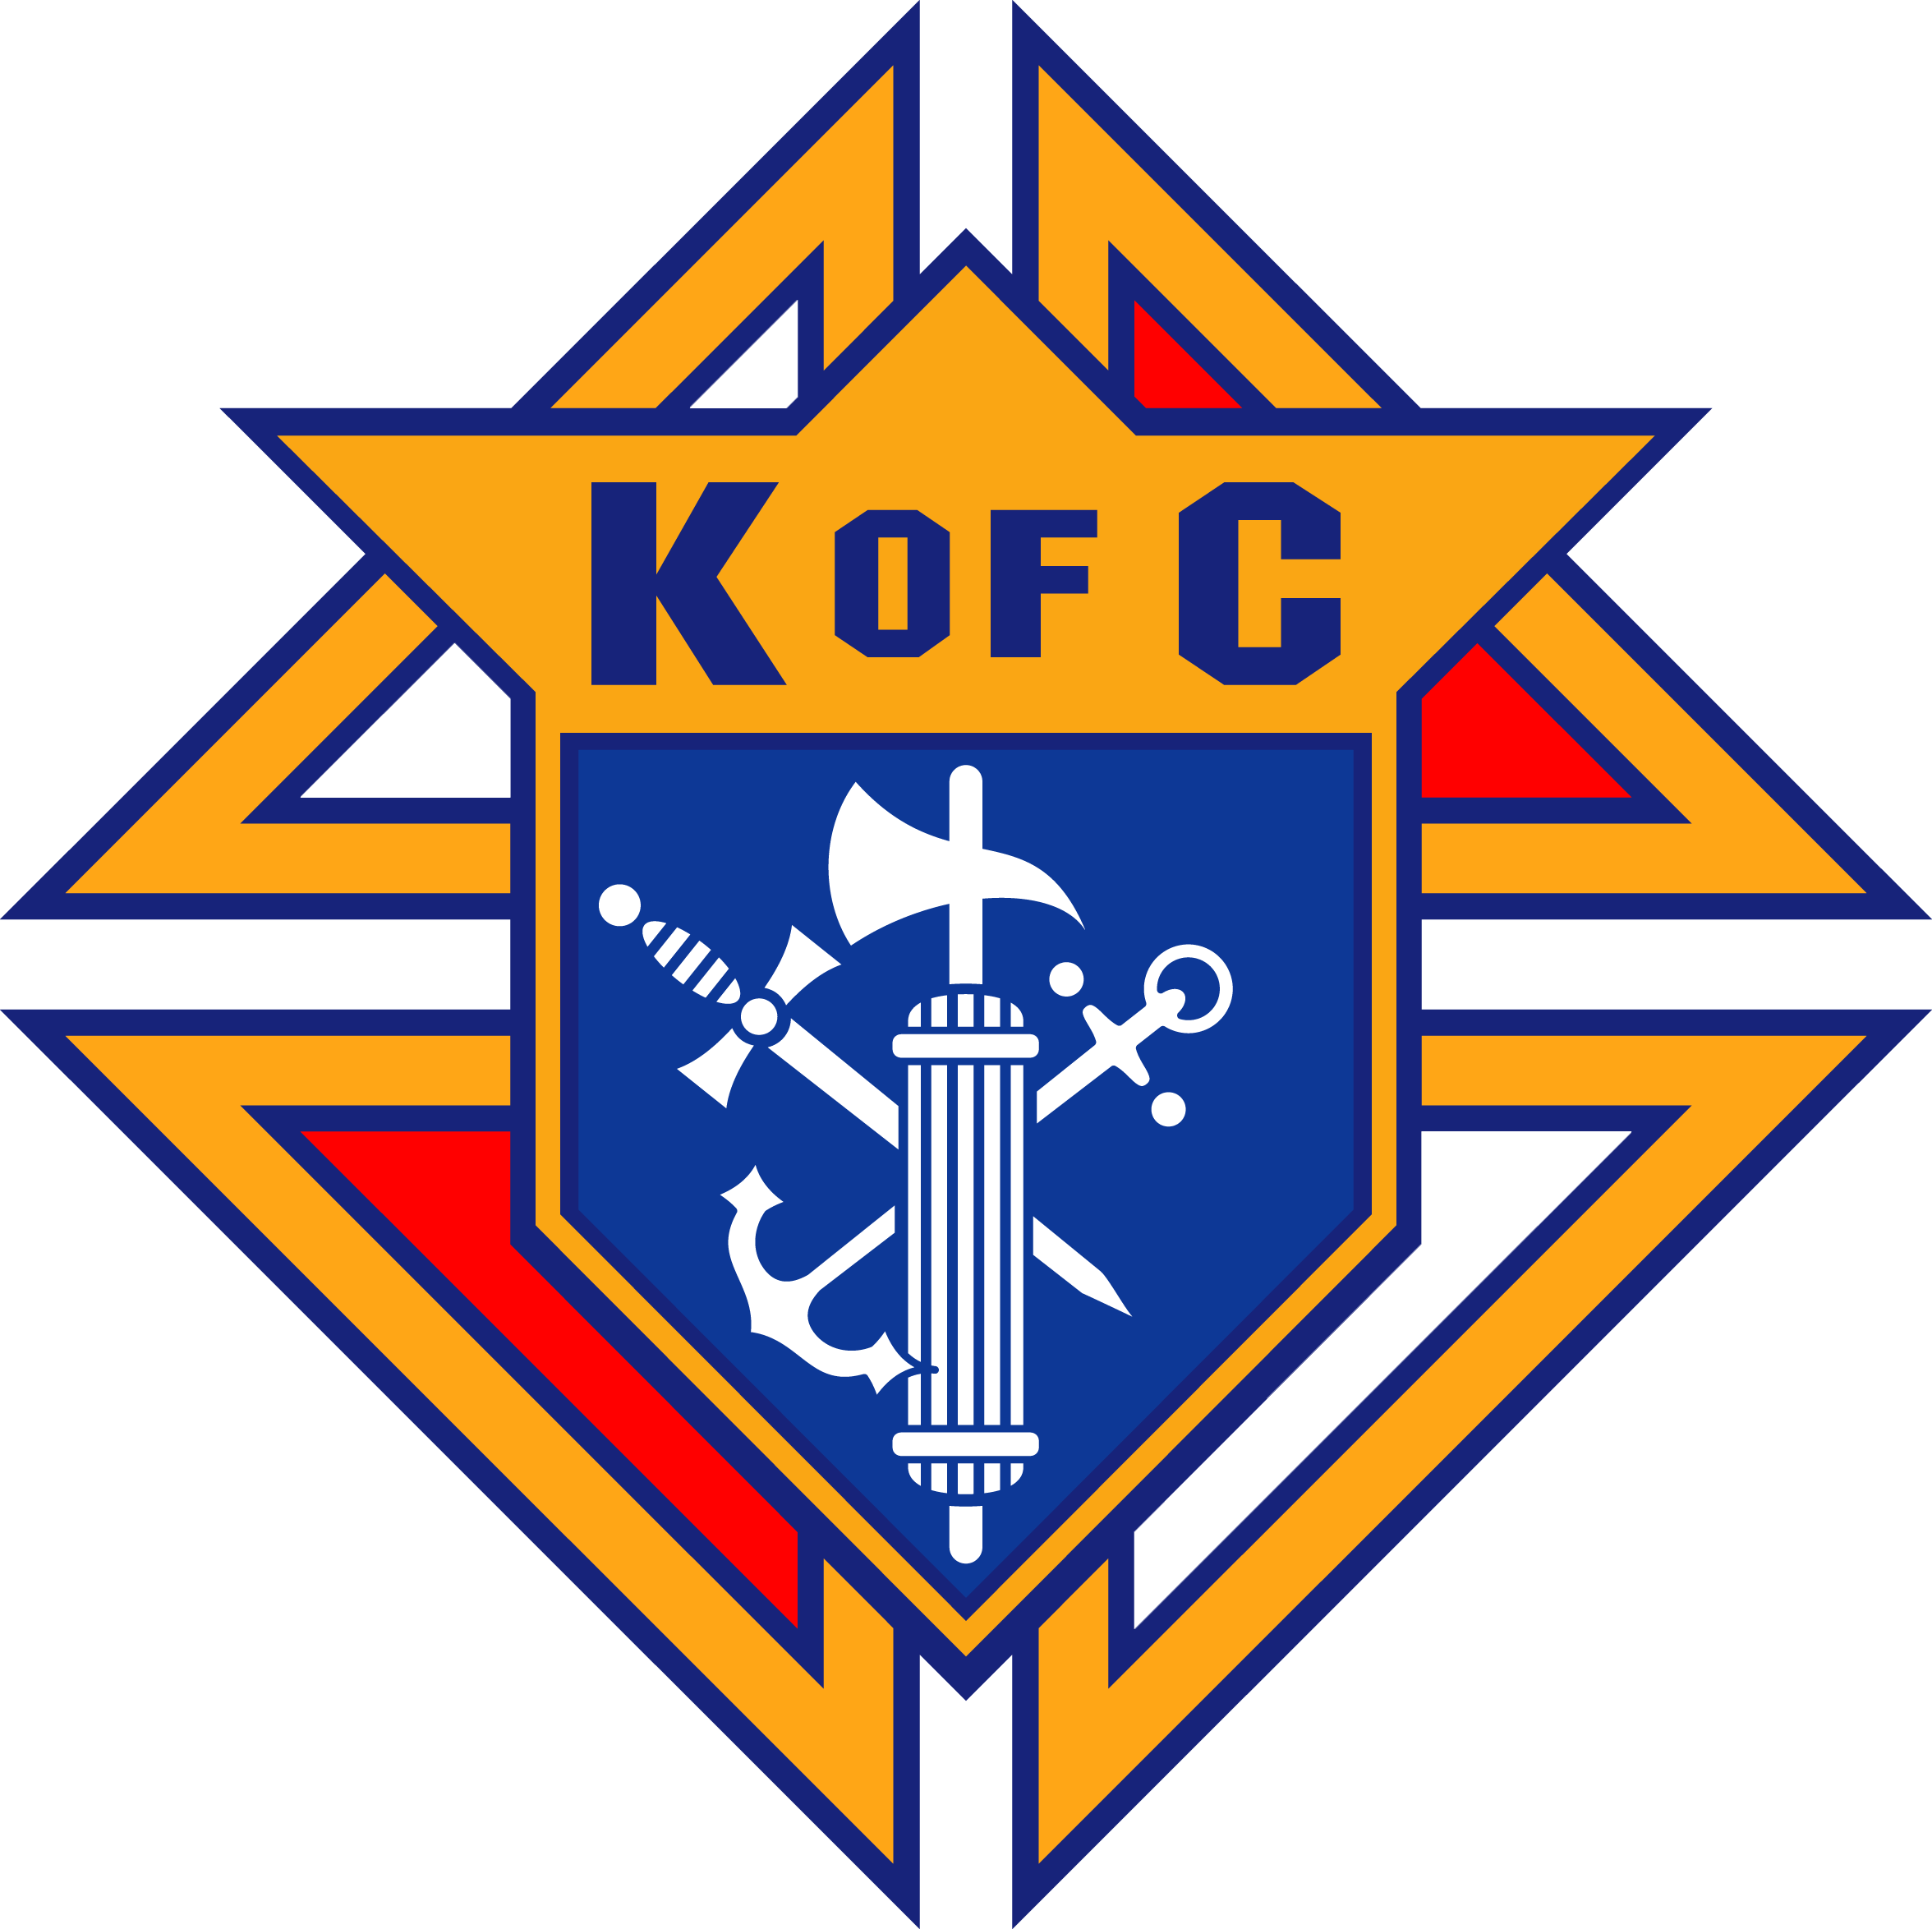 27th Annual Knights of Columbus scholarships announced | News